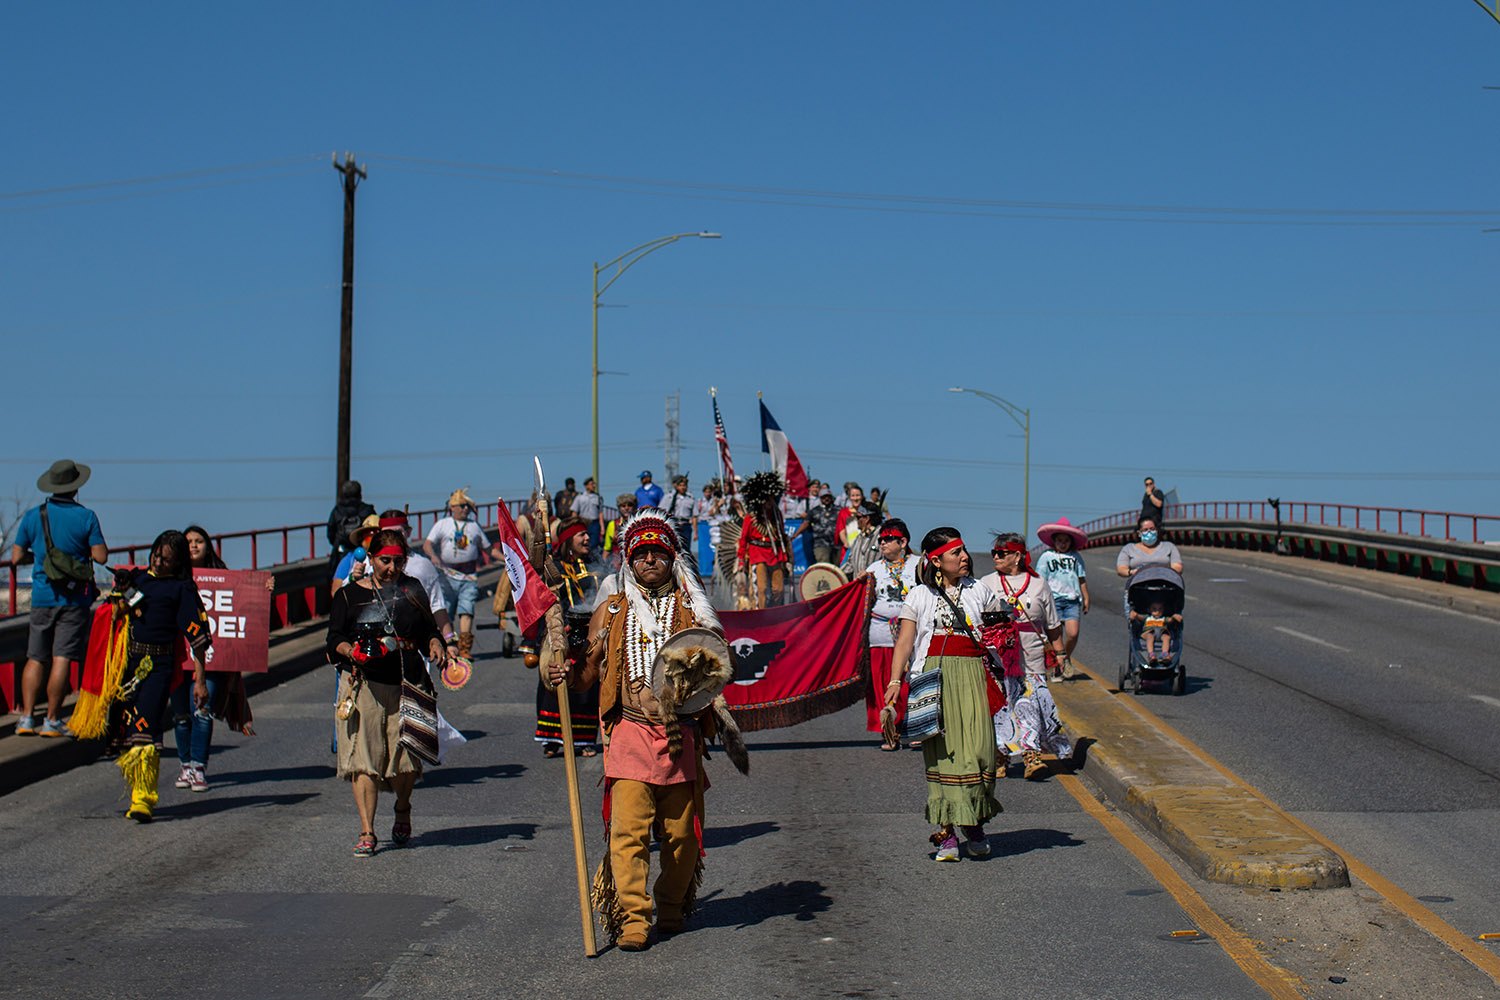 Moses Hernandez, principal chief of The Apache Council of Texas, leads thousands in the 26th annual Cesar E. Chavez March for Justice through downtown San Antonio, Texas, on Saturday, March 26, 2022. Photo by Kaylee Greenlee Beal | Heron contributor